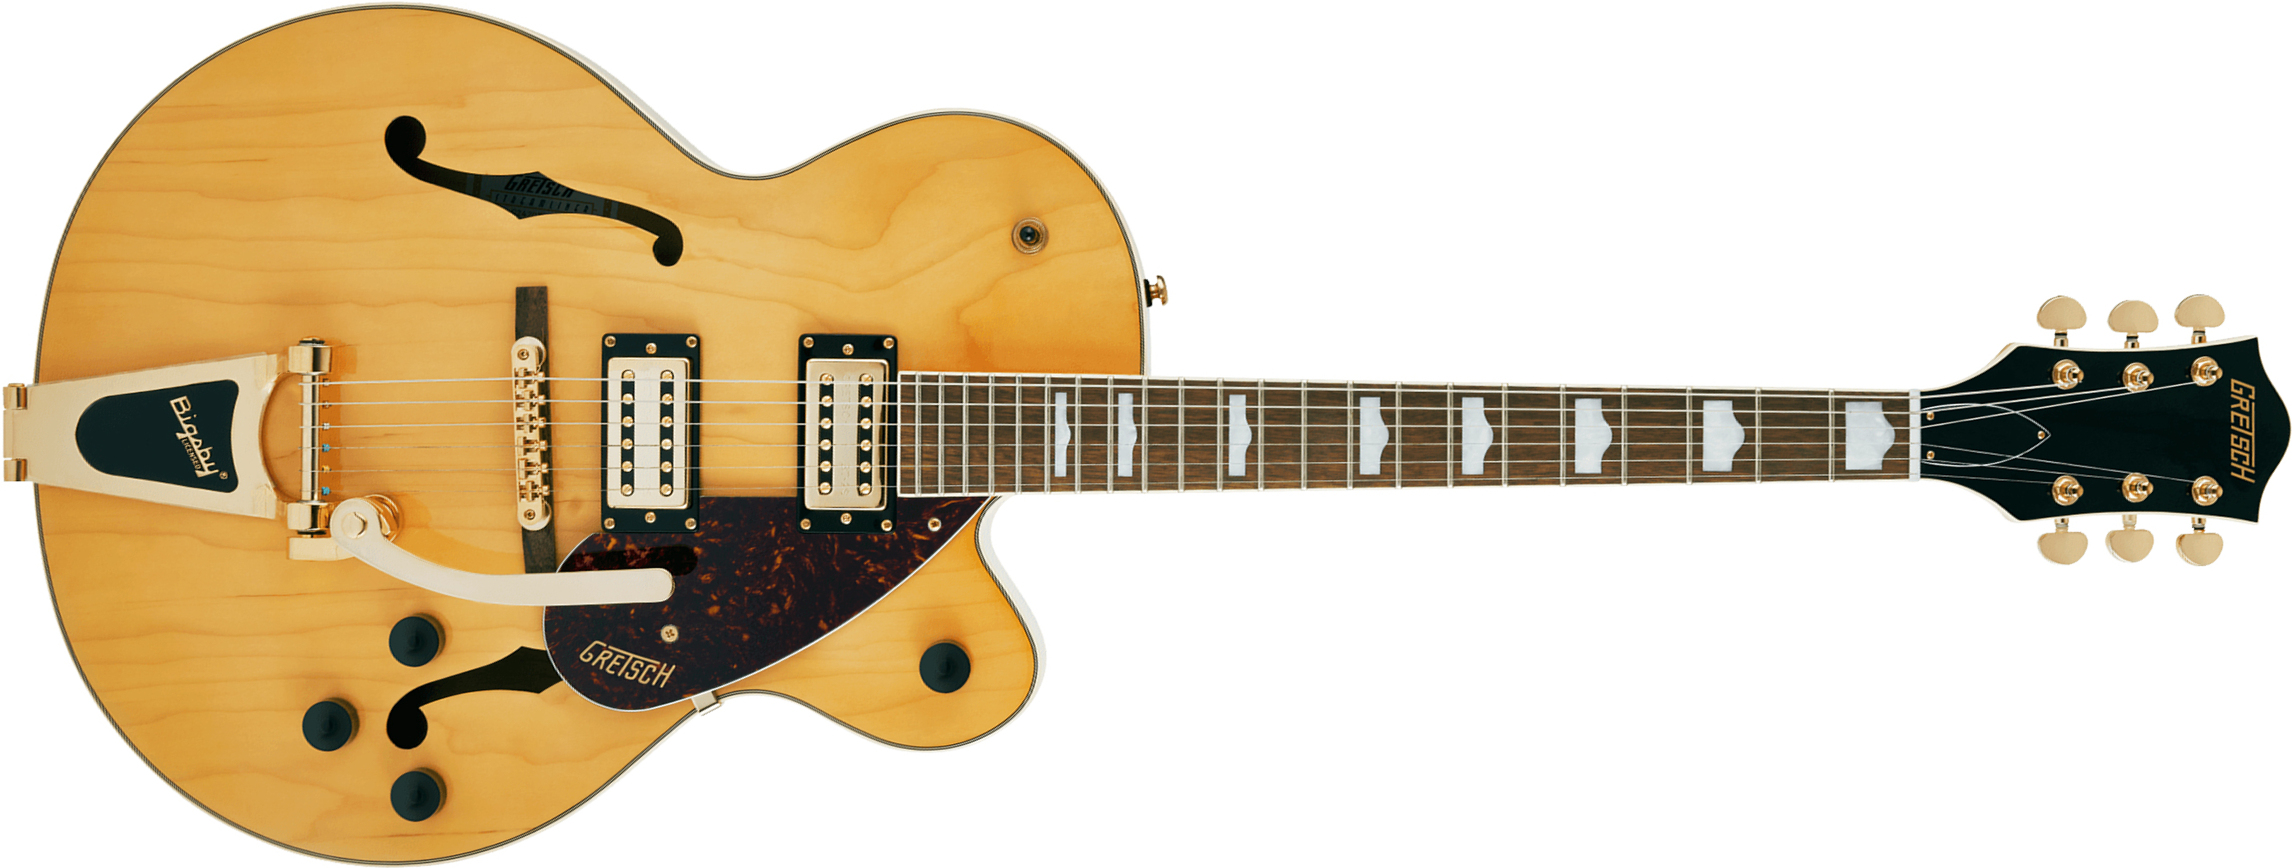 Gretsch G2410tg Streamliner Hollow Body Bigsby Gh Hh Trem Lau - Village Amber - Semi-hollow electric guitar - Main picture